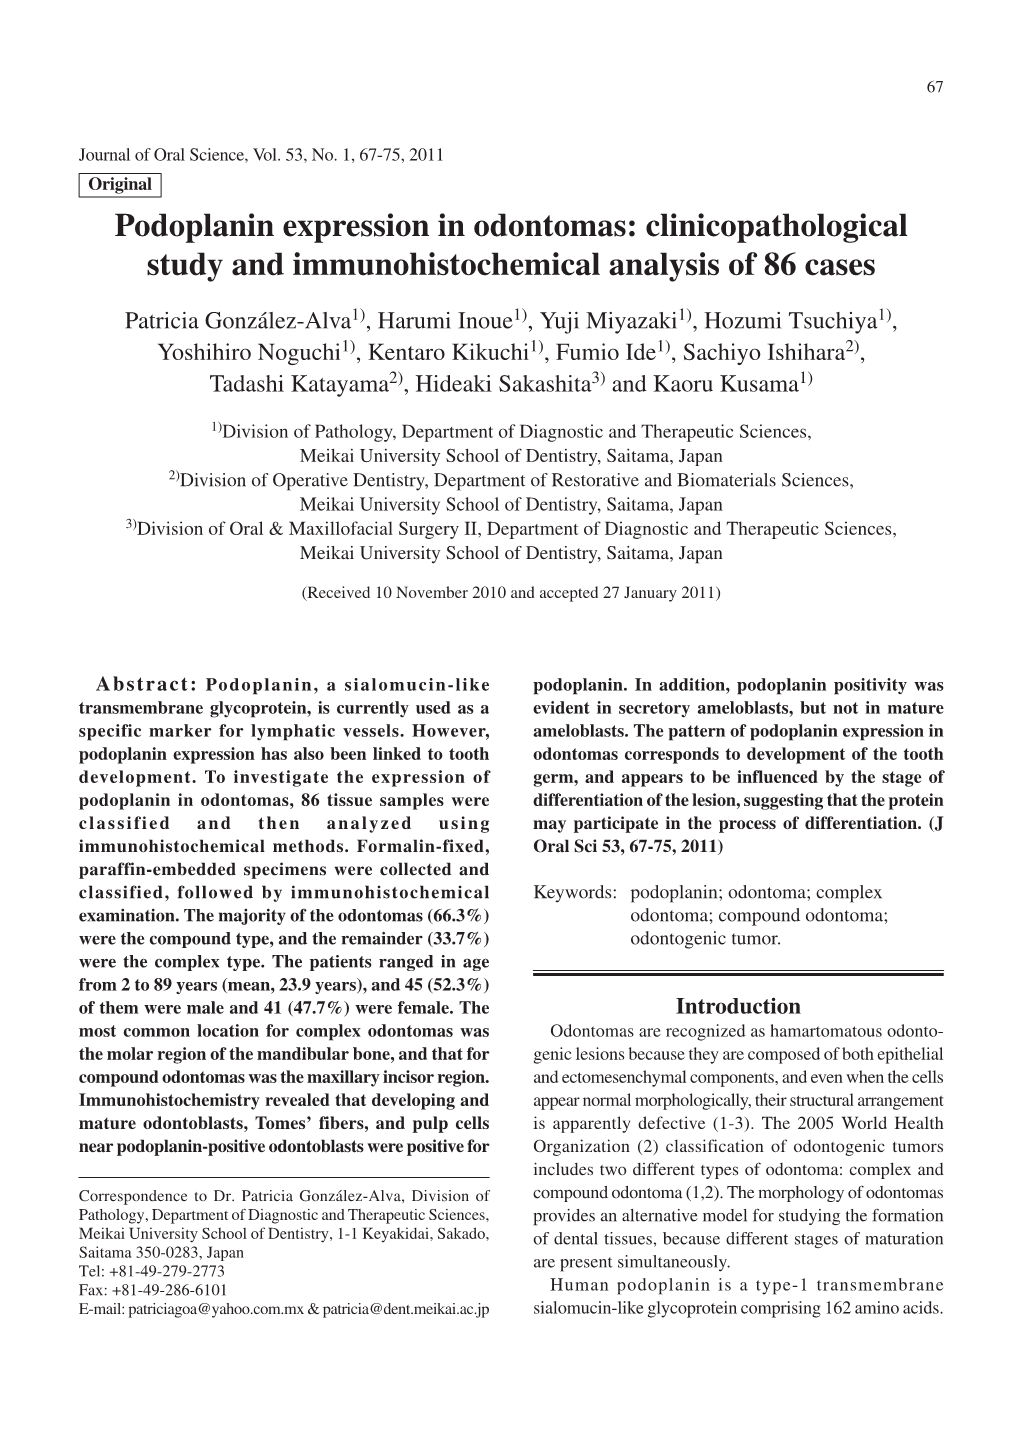 Podoplanin Expression in Odontomas: Clinicopathological Study and Immunohistochemical Analysis of 86 Cases